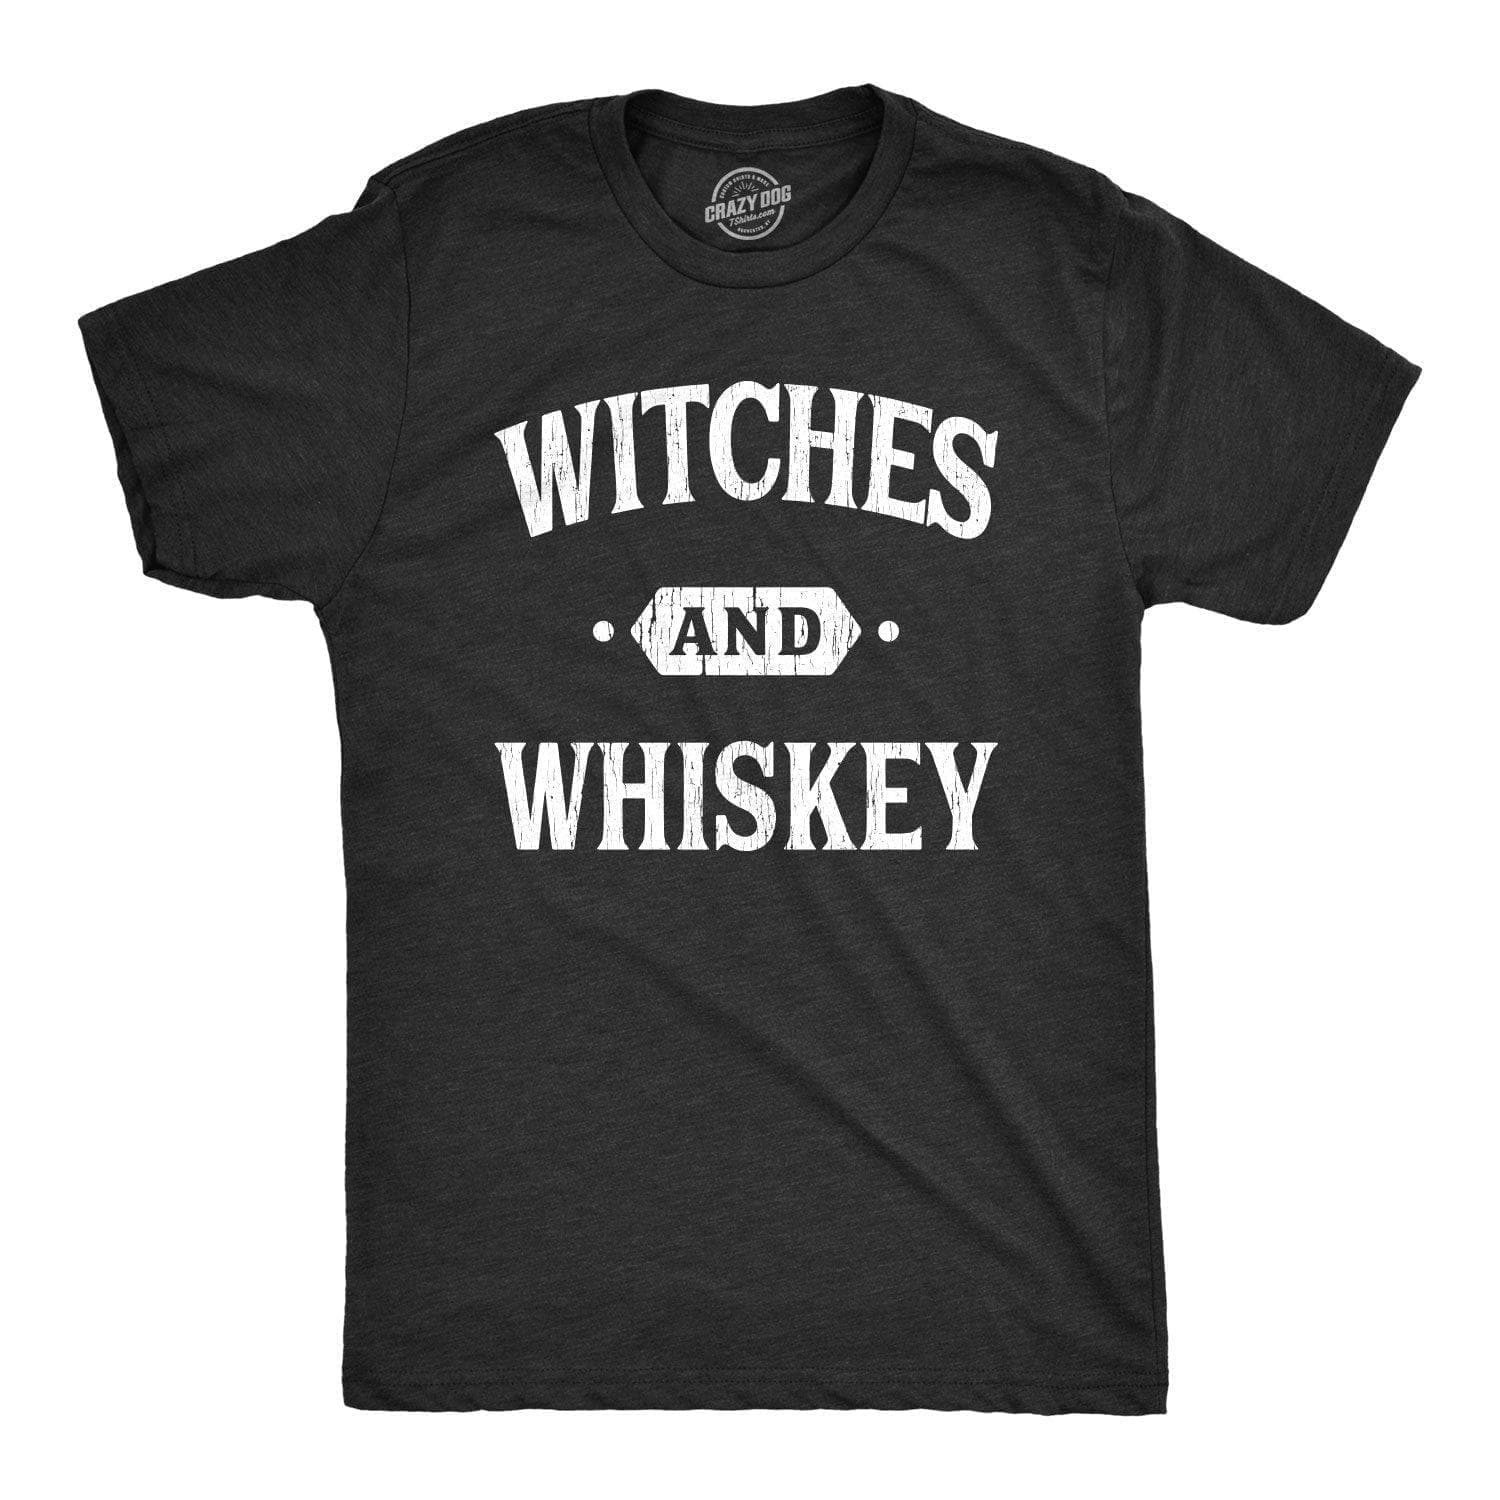 Witches And Whiskey Men's Tshirt - Crazy Dog T-Shirts